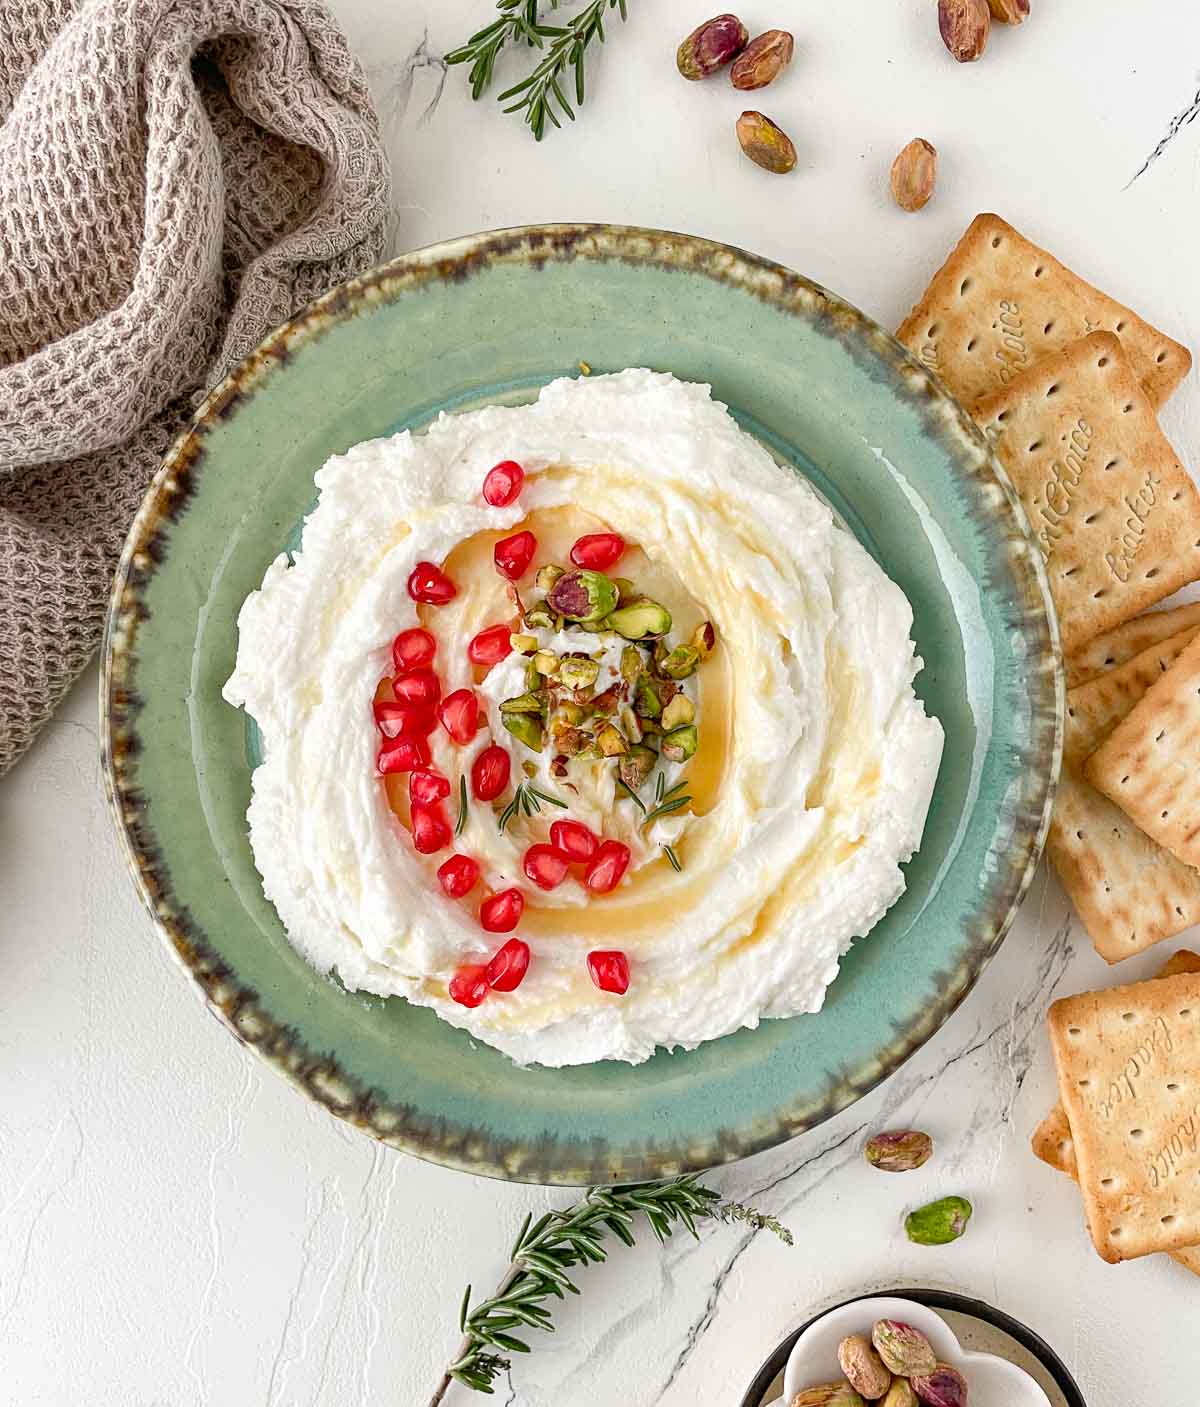 Bowl of whipped goat cheese dip garnished with honey, pistachios, and pomegranate arils